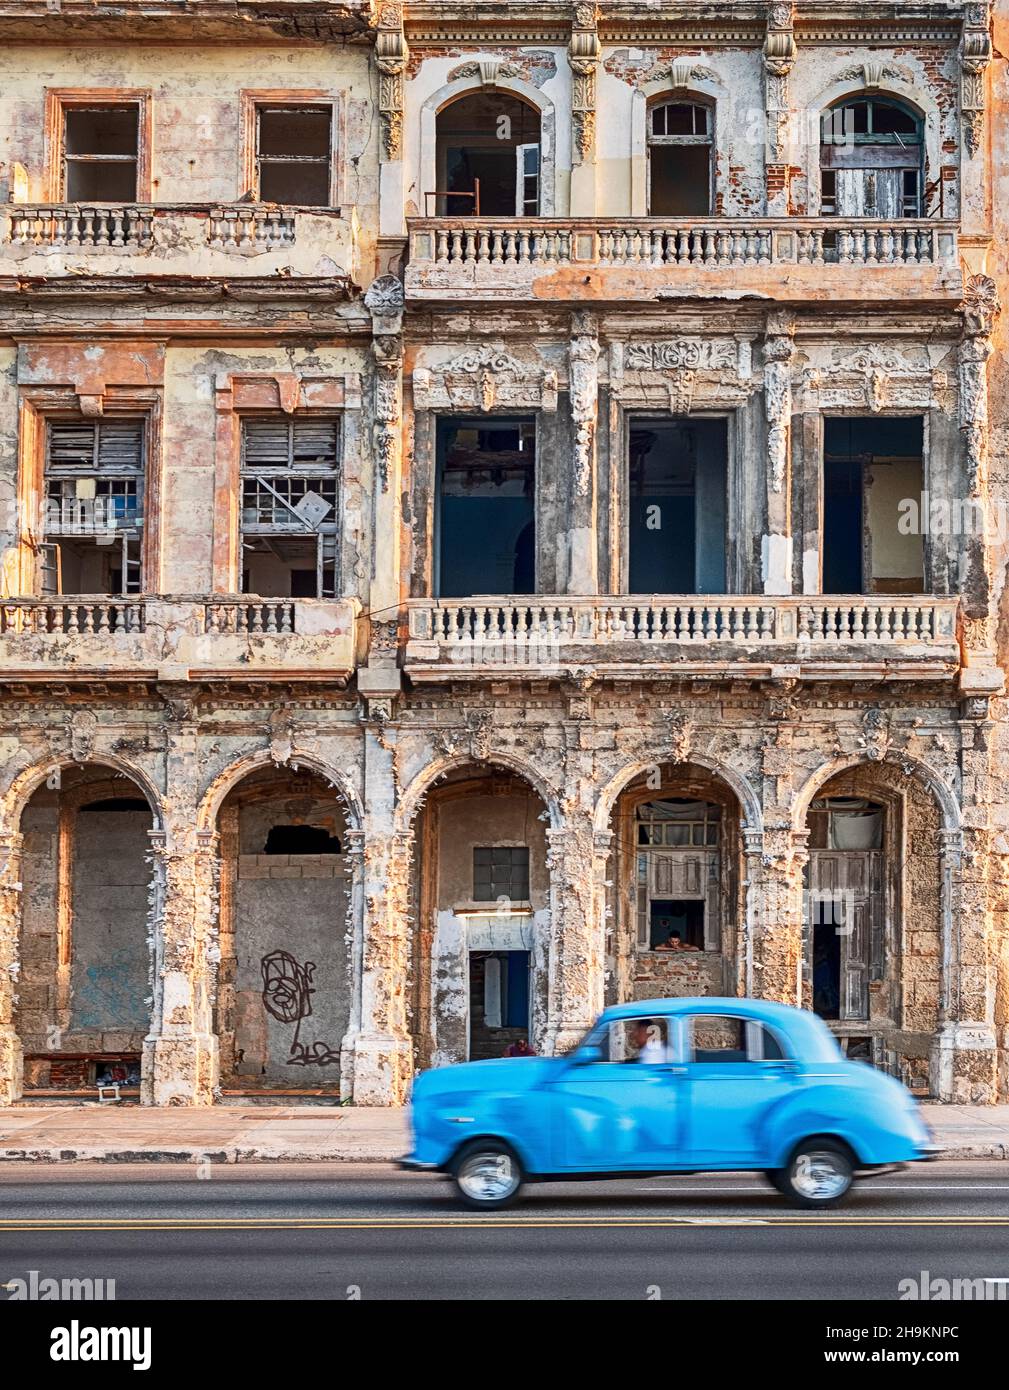 HAVANA, CUBA - DECEMBER 31, 2019: An anonymous man drives a vintage American car as a taxi on the Malecon waterfront road in front of an old building. Stock Photo